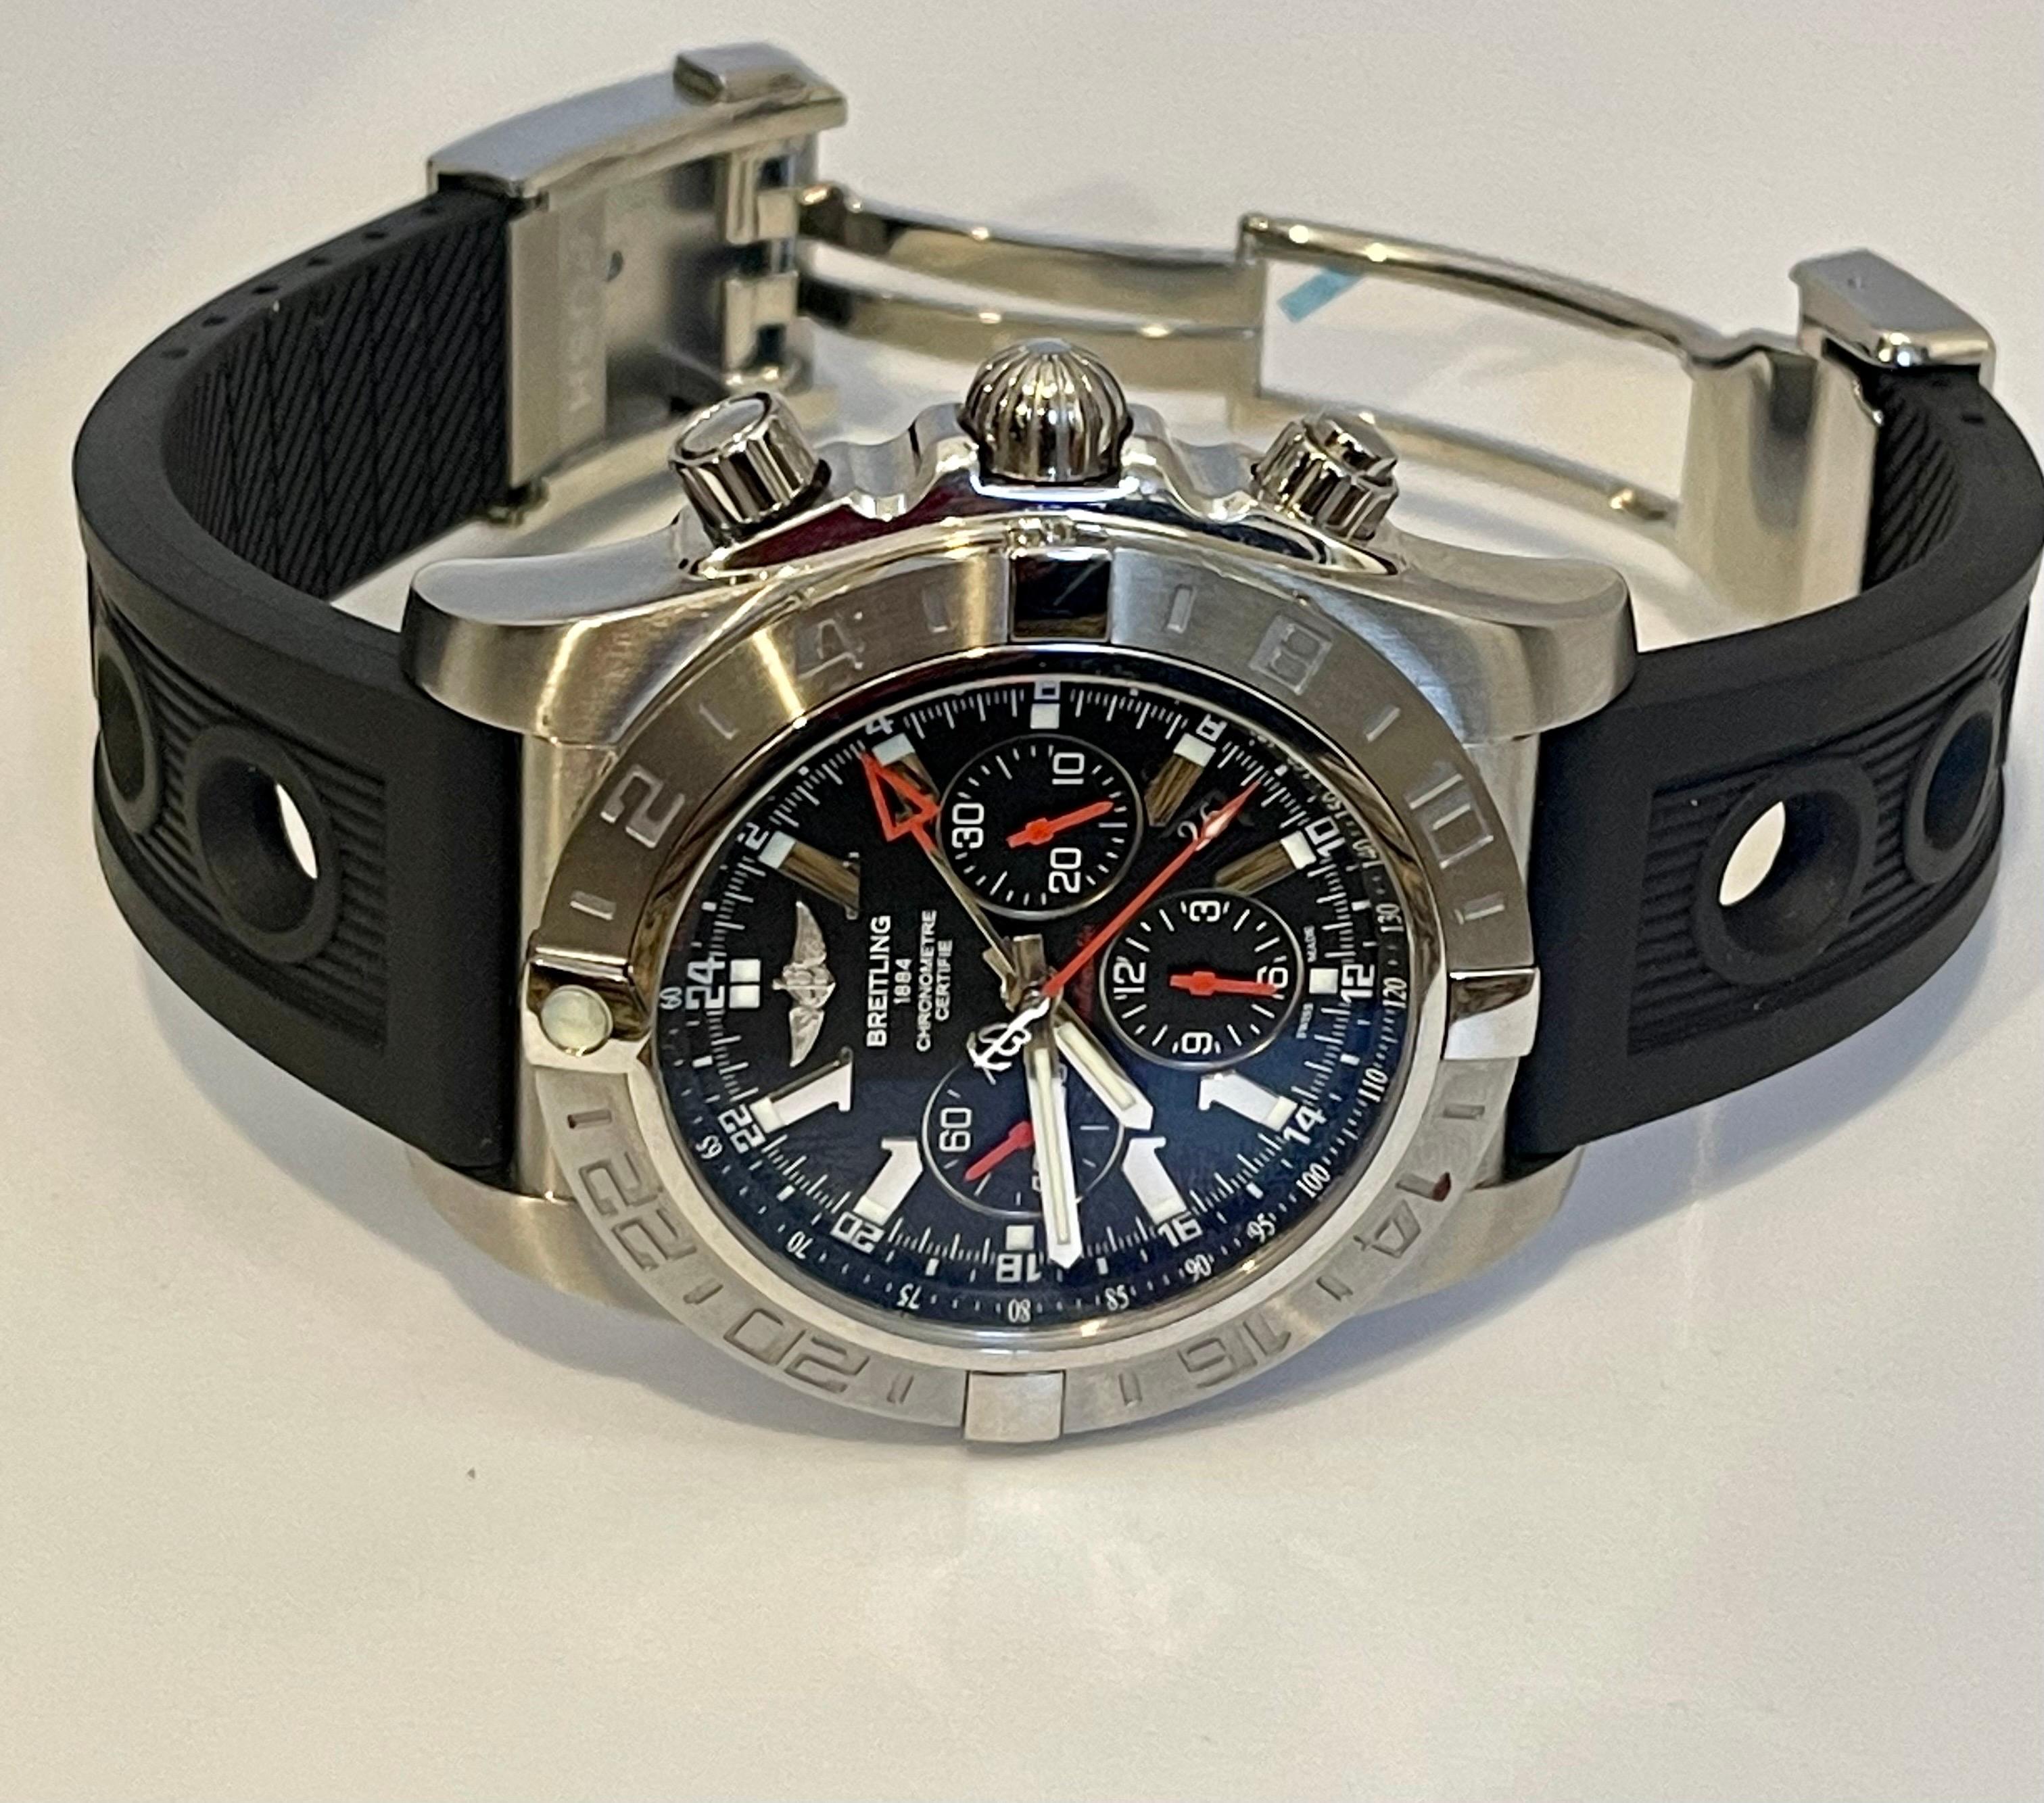 Breitling Super Avenger Chrono Limited Edition Black PVD Steel Rare, 4004422 For Sale 5